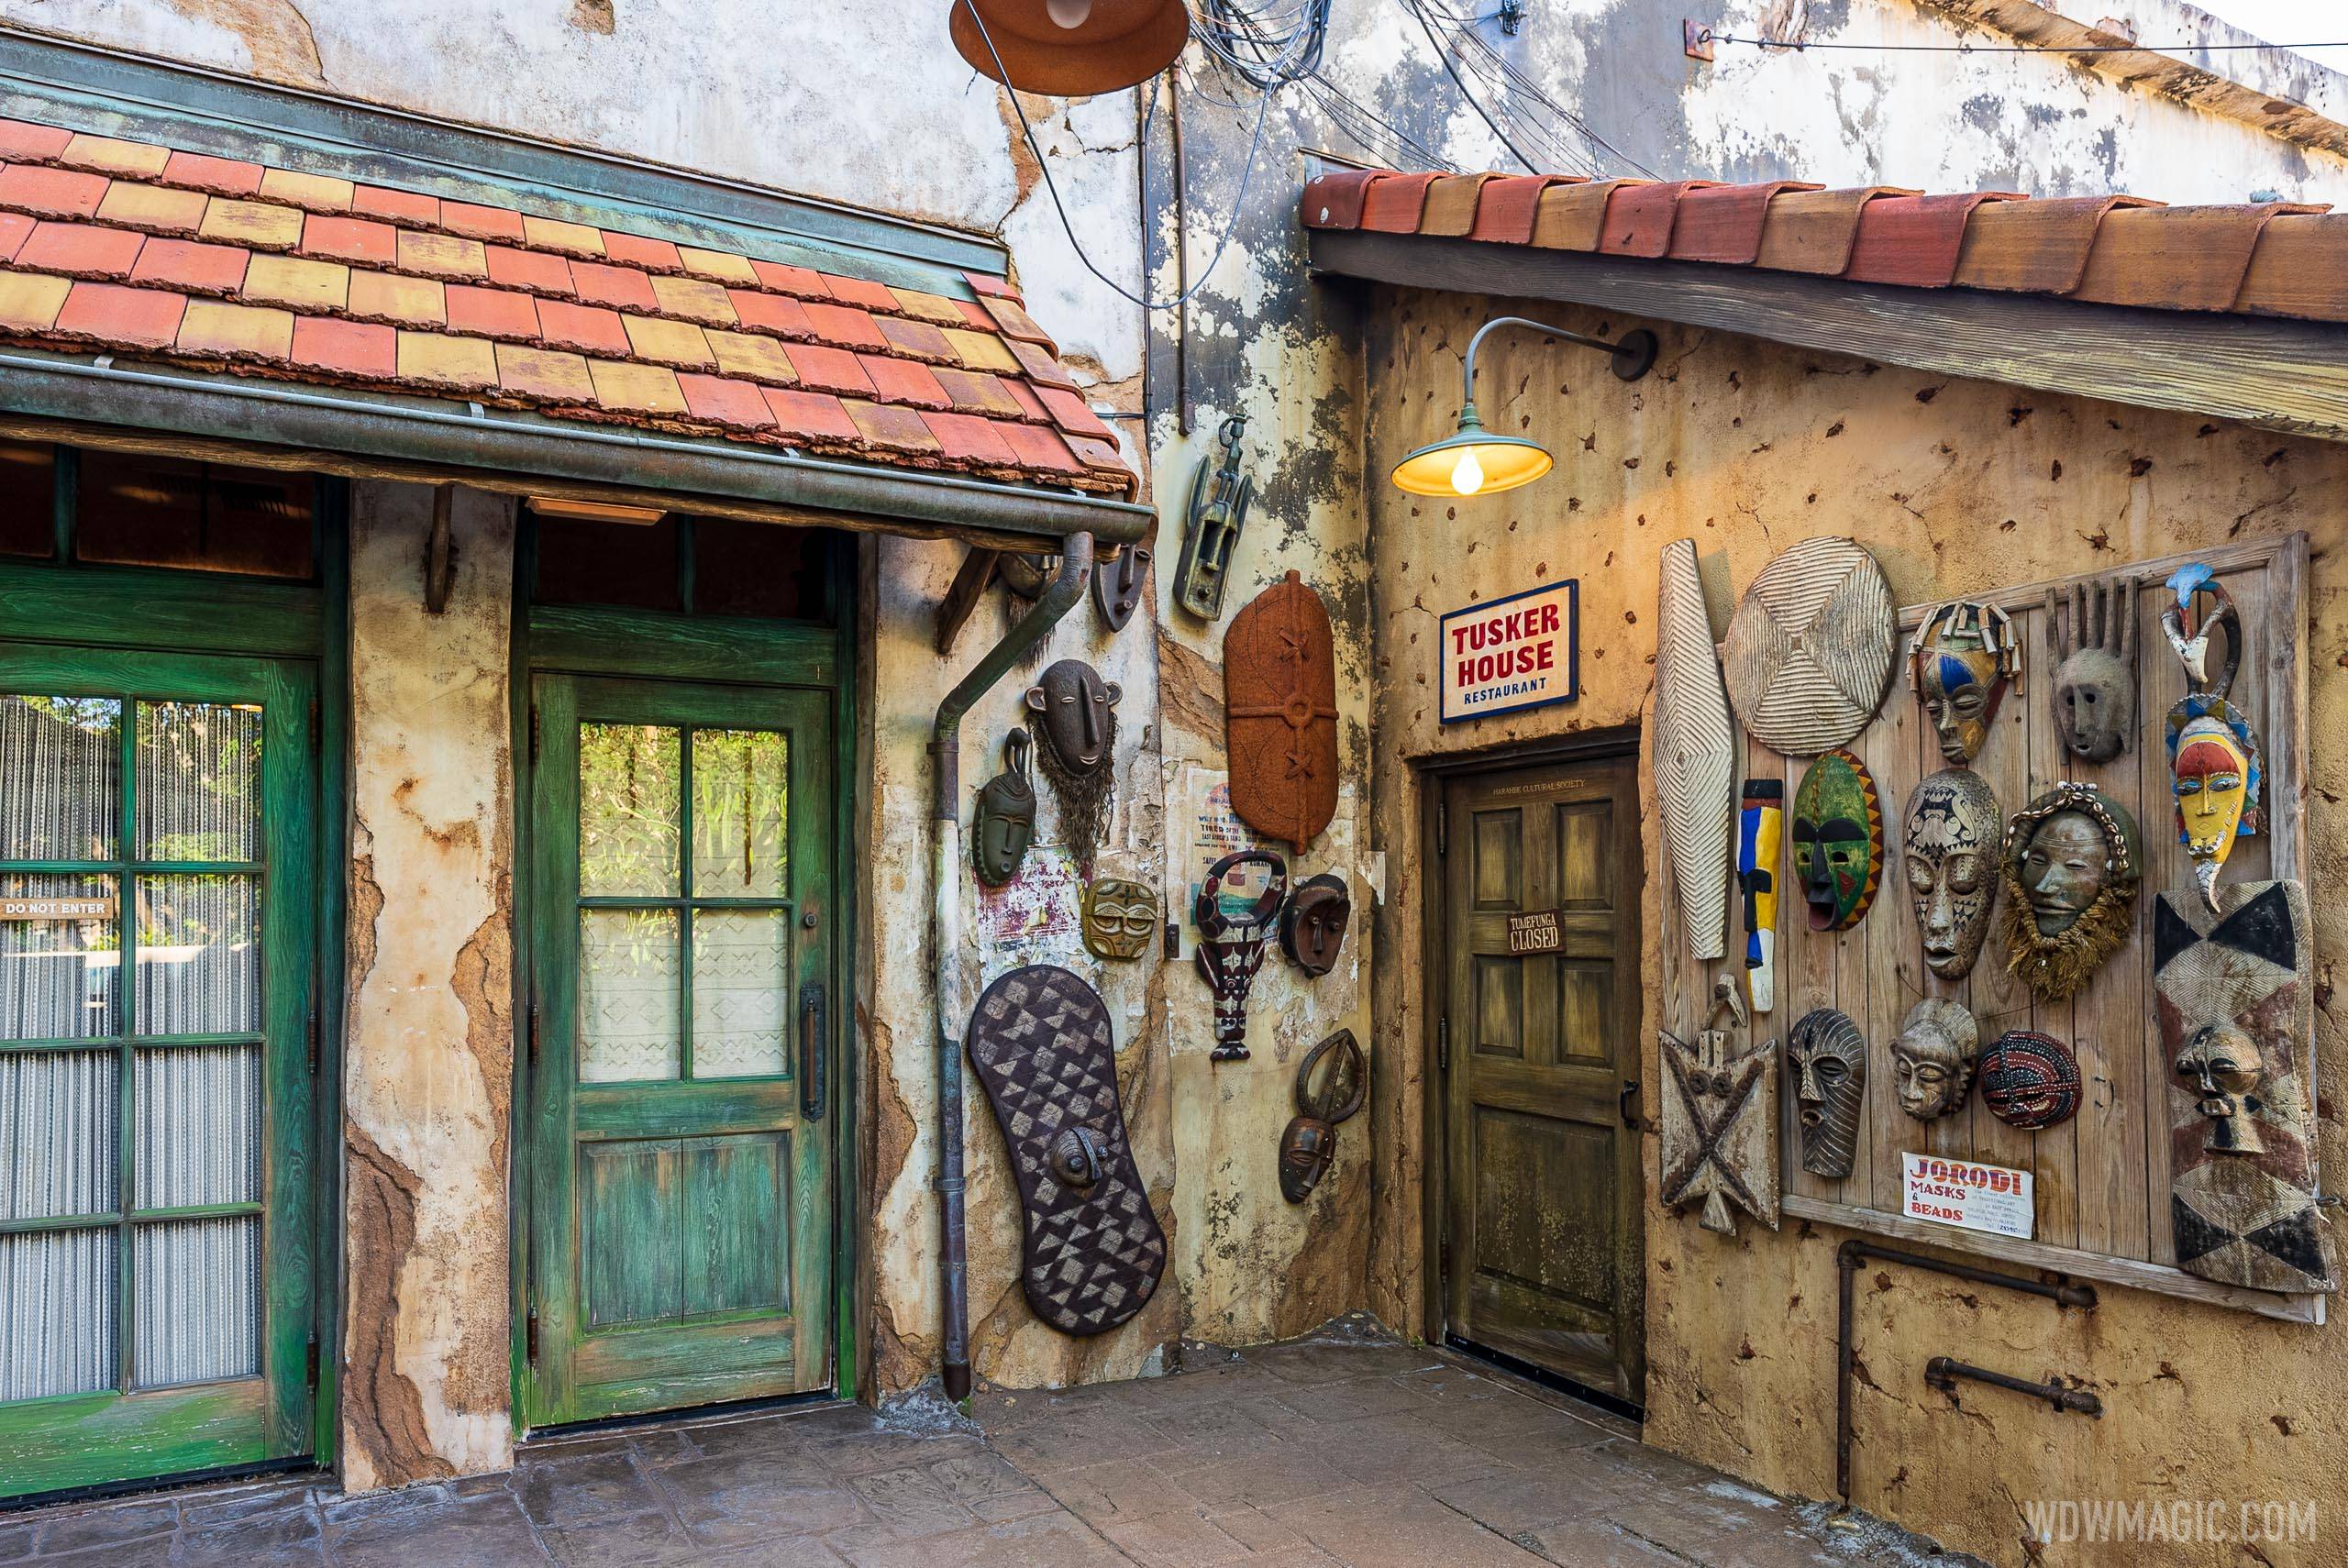 New details on Tusker House's return to buffet dining at Disney's Animal Kingdom